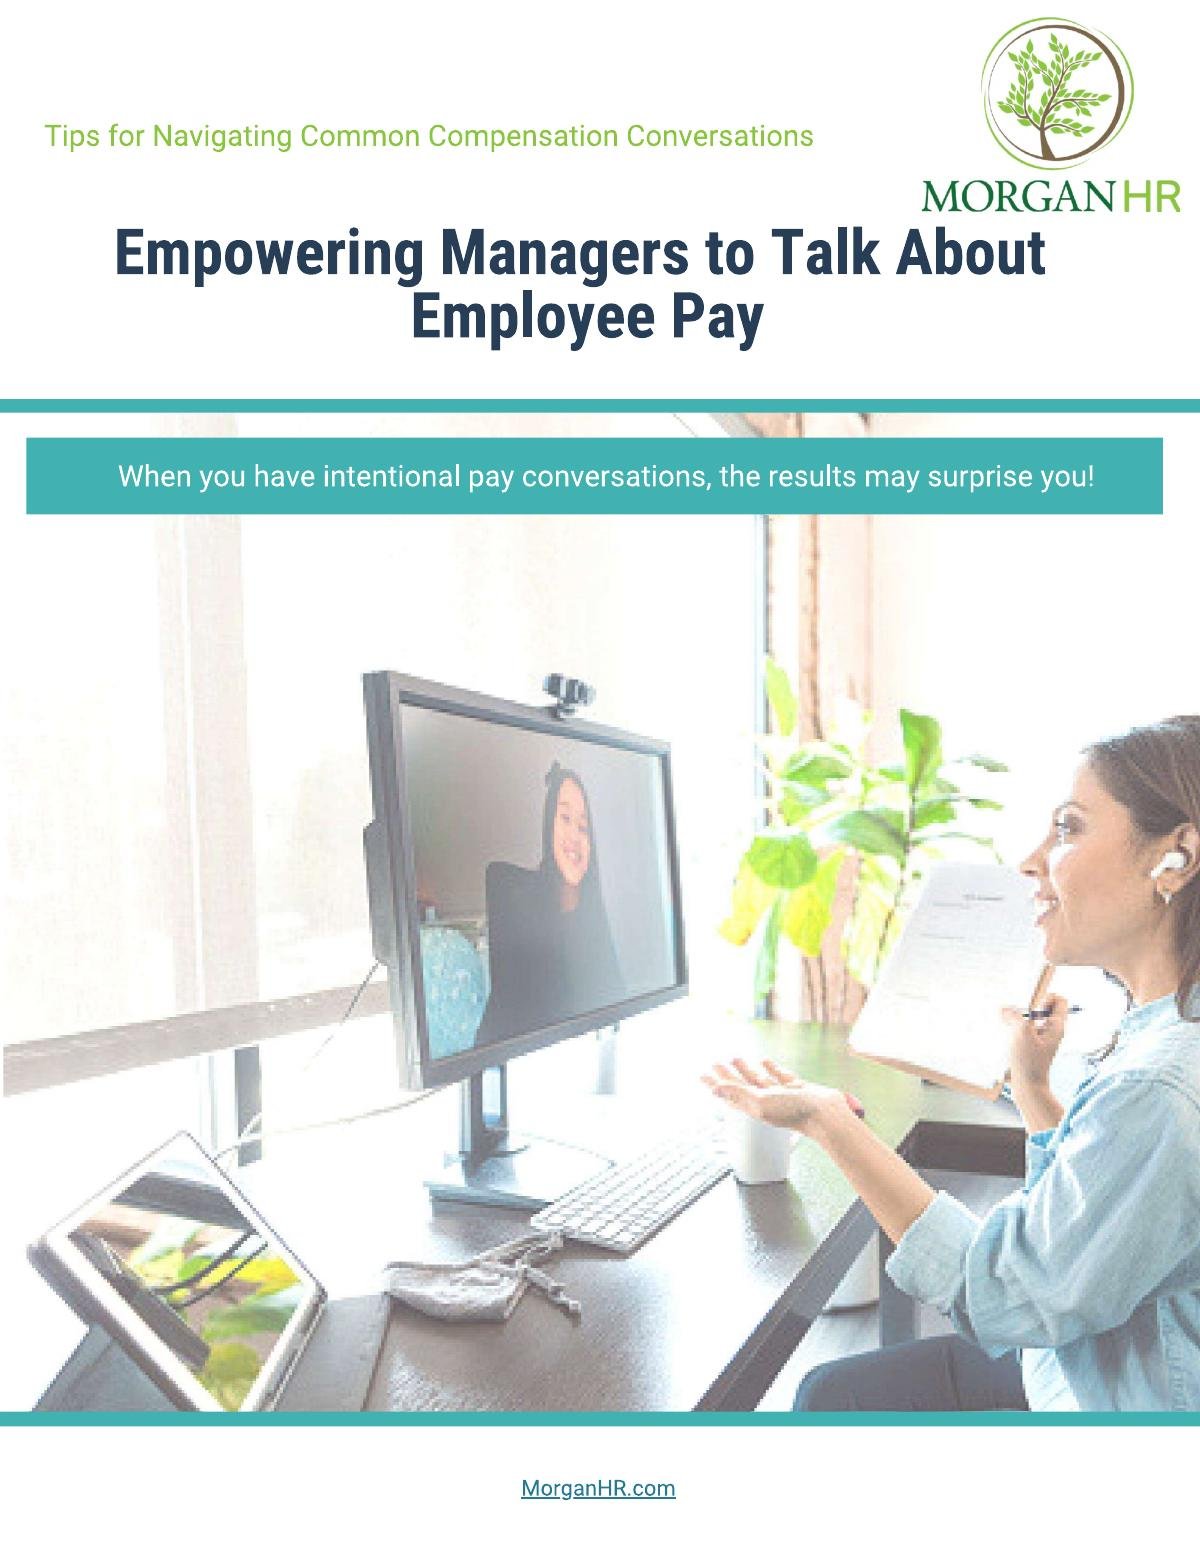 Empowering Managers to Talk About Employee Pay